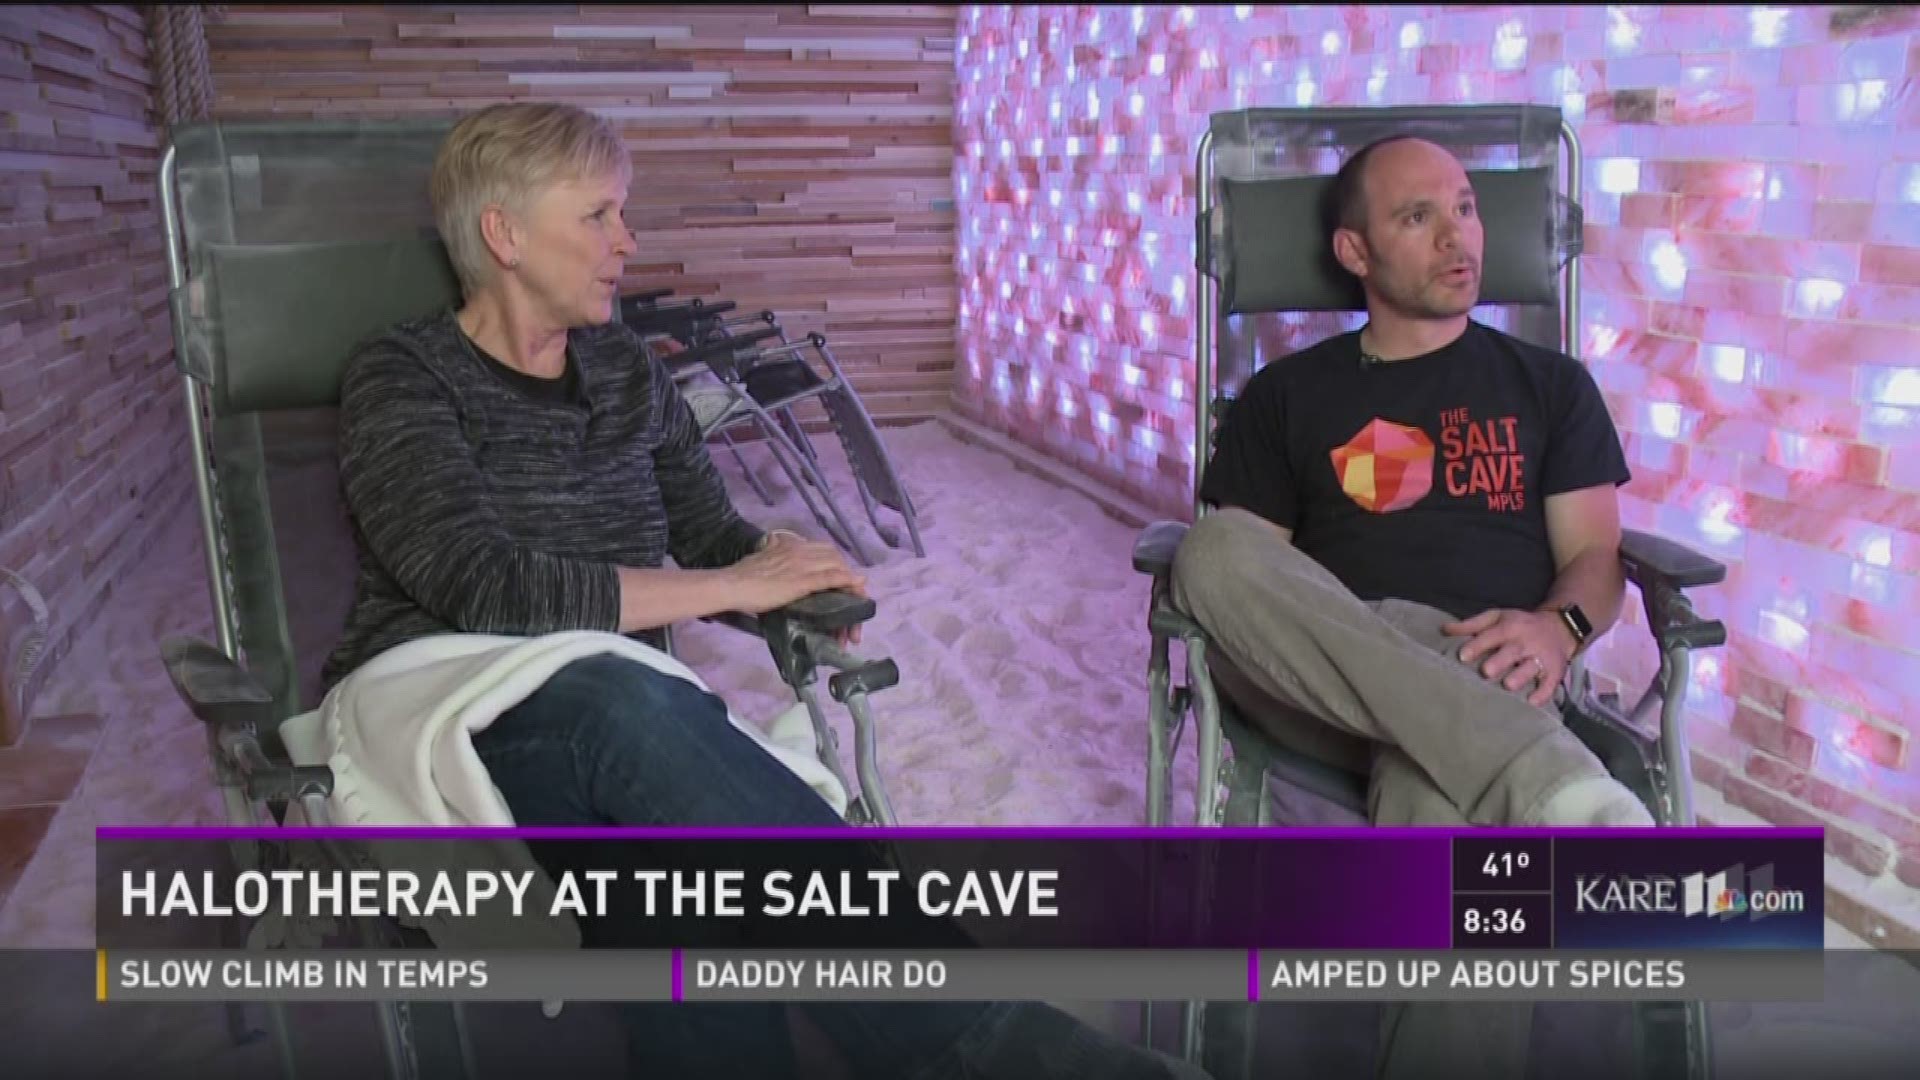 Halotherapy at the Salt Cave